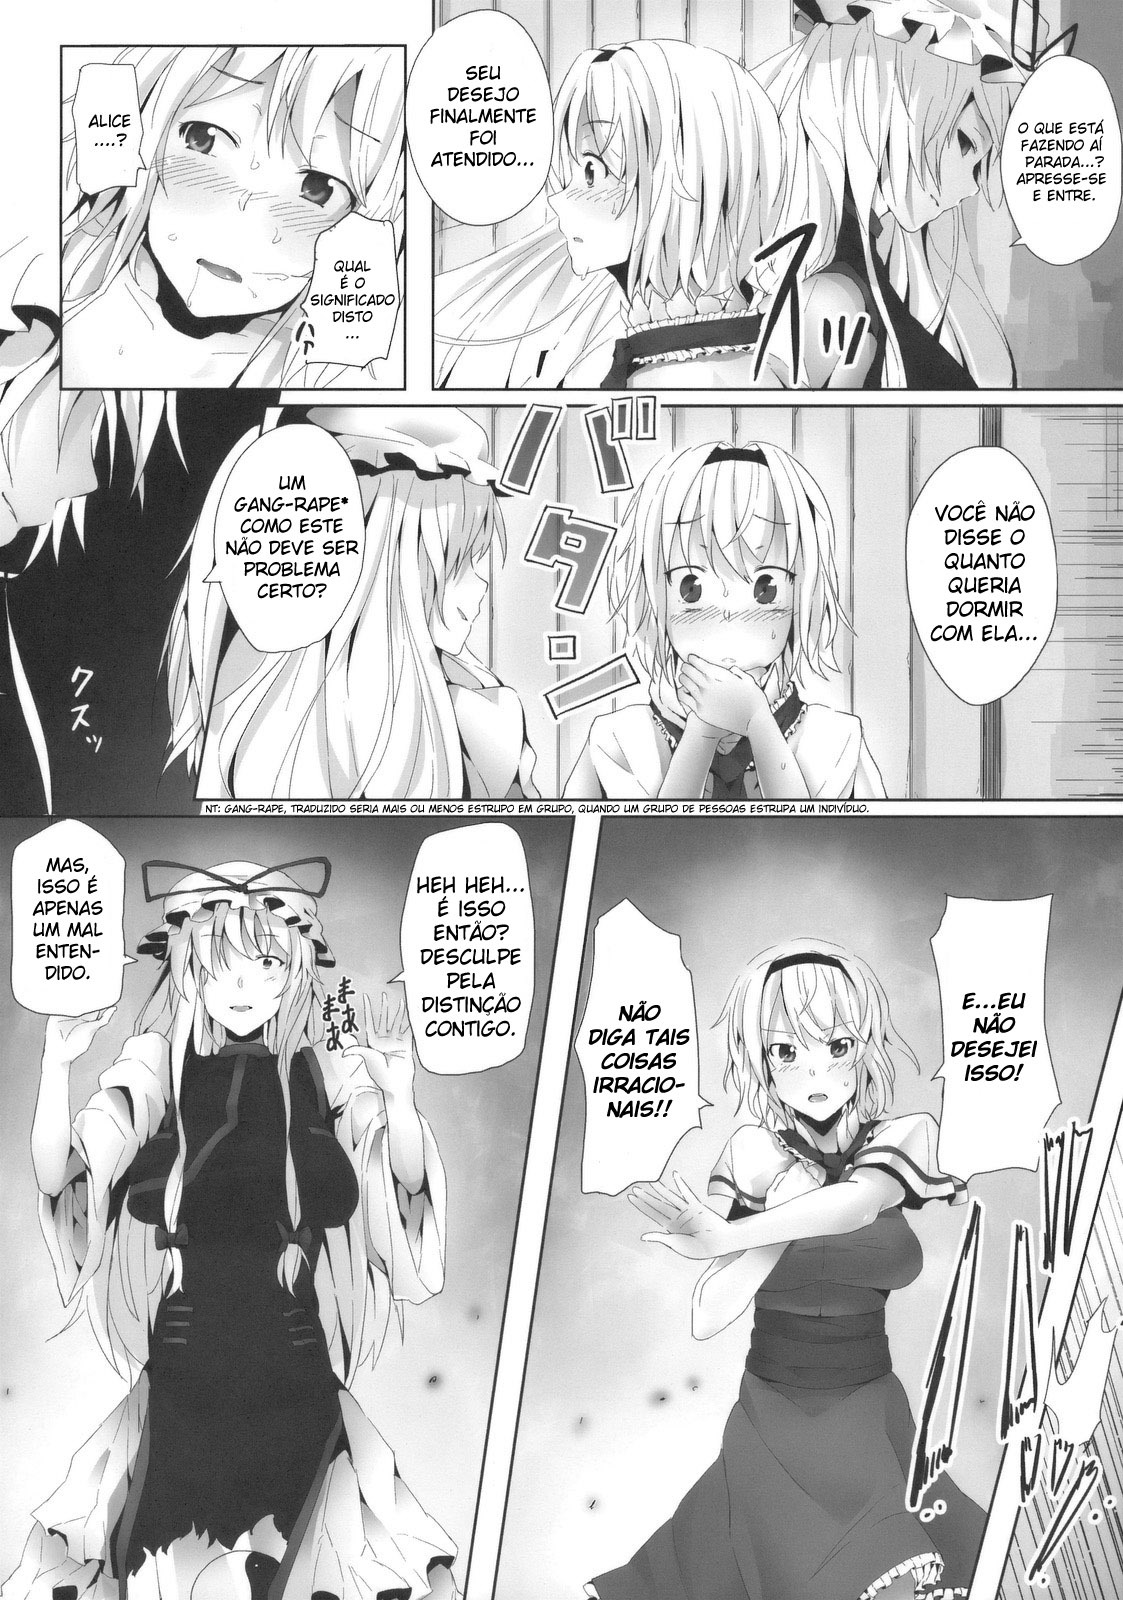 (C78) [Galley (ryoma)] Alice in Underland (Touhou Project) [Portuguese-BR] [Chrono Kimera H] page 6 full